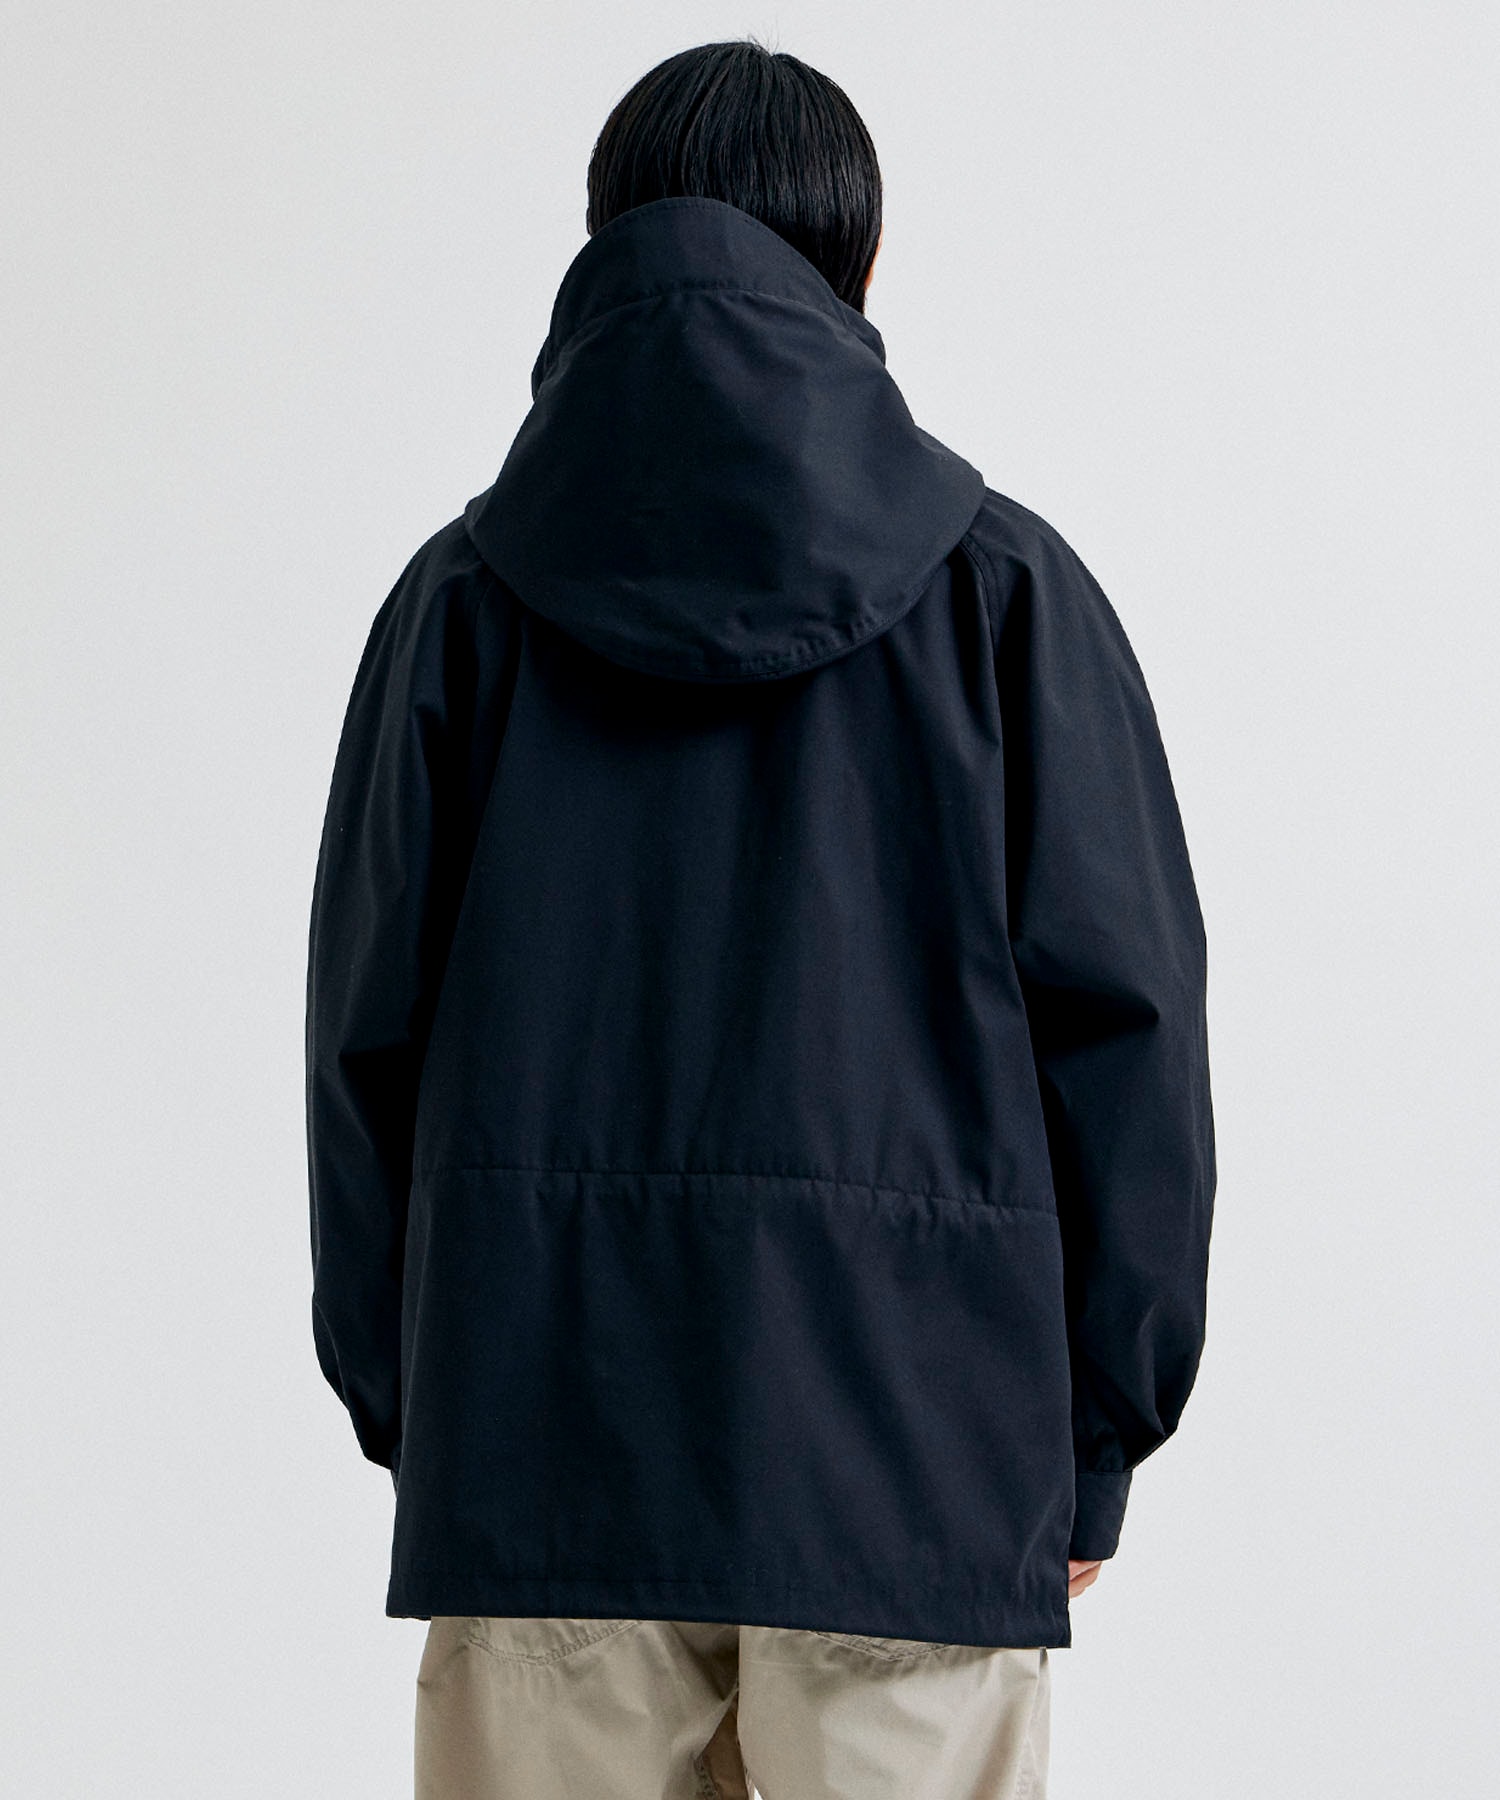 65/35 Mountain Parka THE NORTH FACE PURPLE LABEL